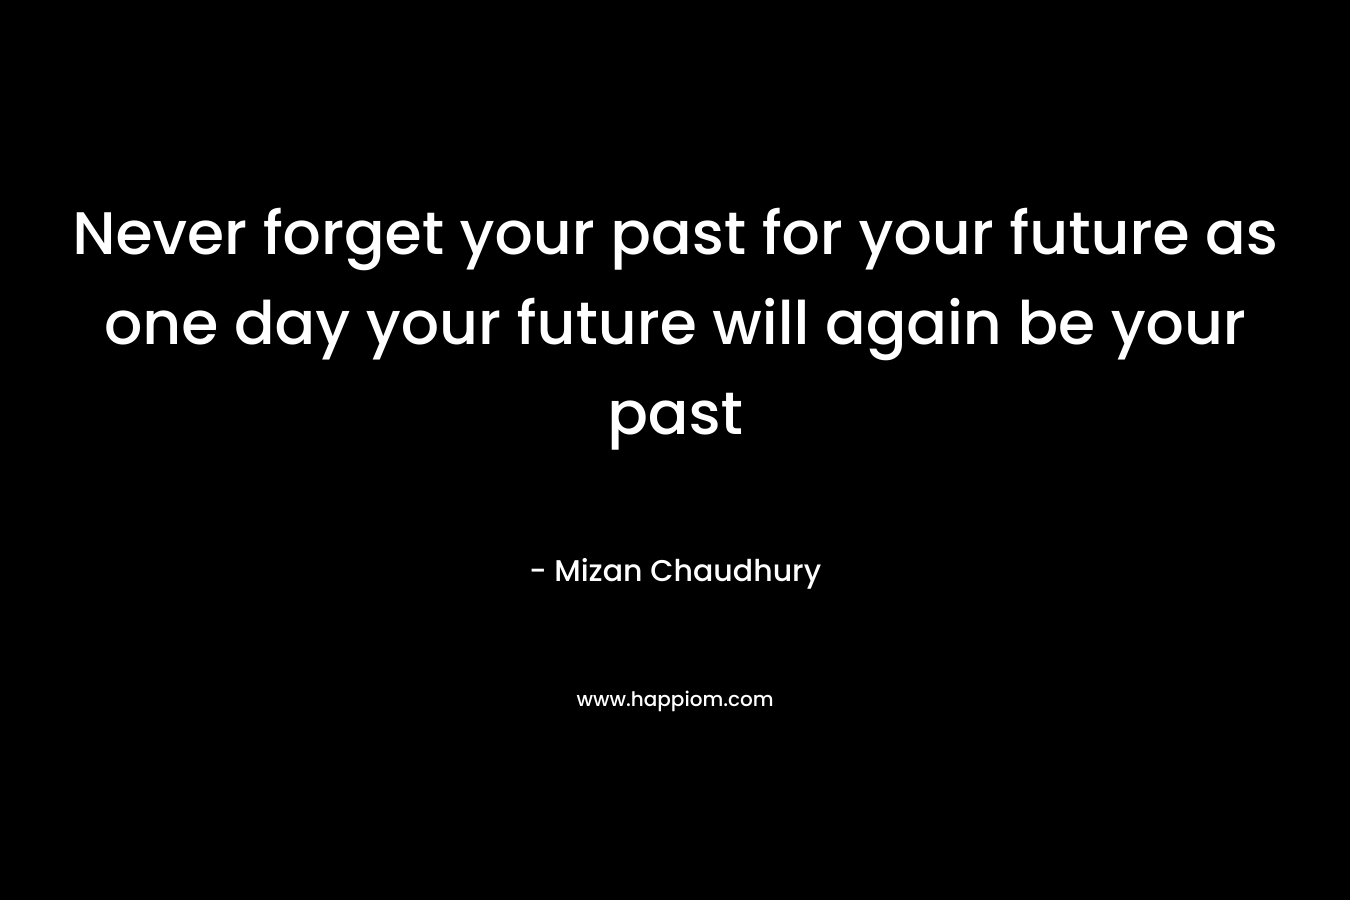 Never forget your past for your future as one day your future will again be your past